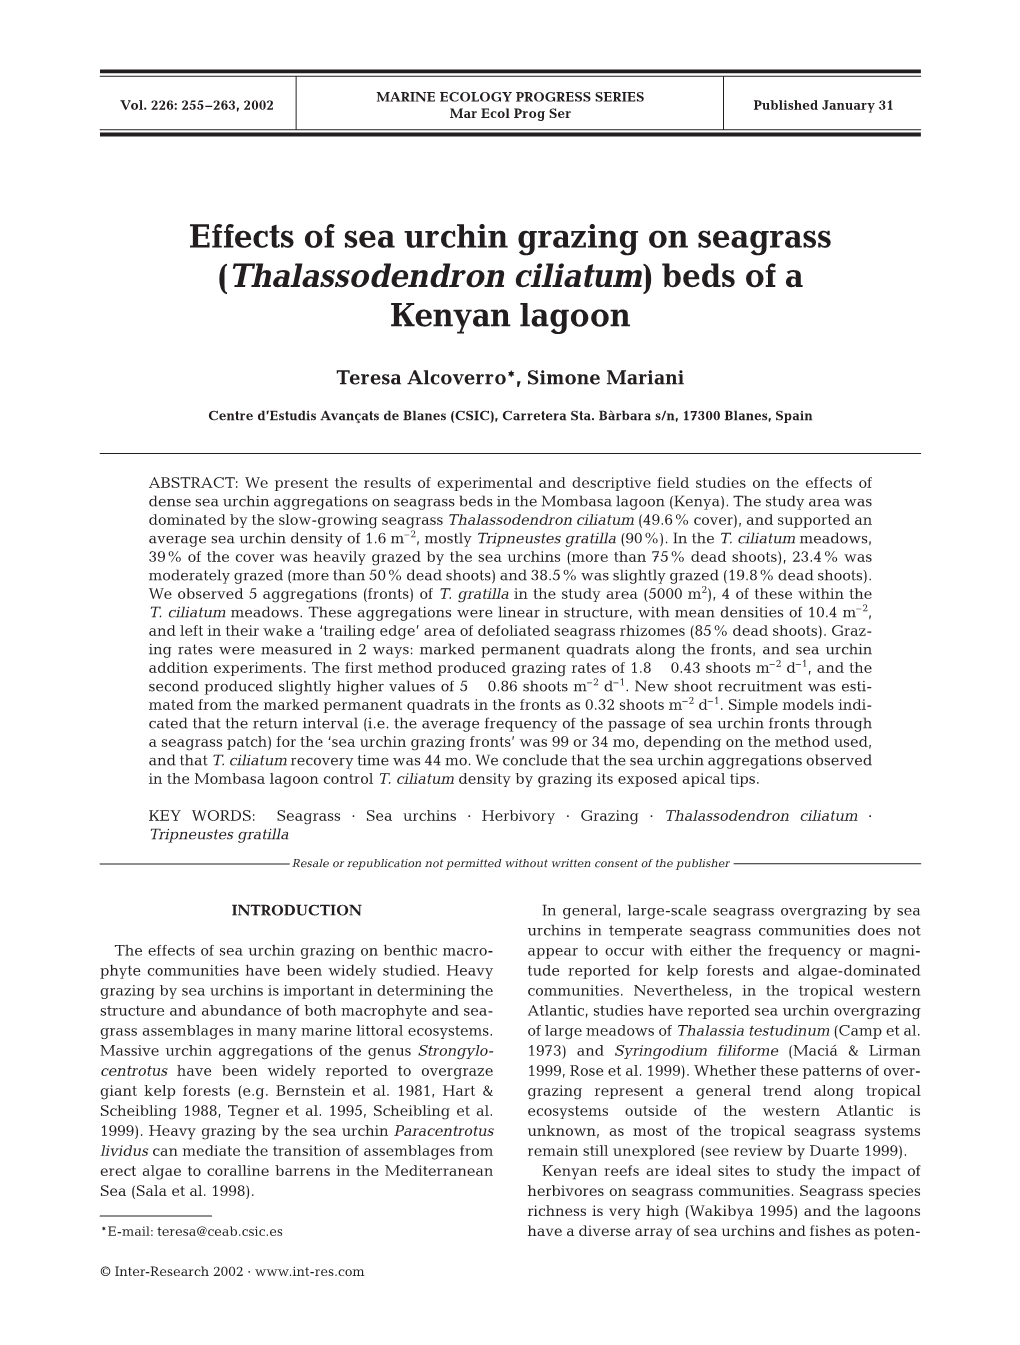 Effects of Sea Urchin Grazing on Seagrass (Thalassodendron Ciliatum) Beds of a Kenyan Lagoon